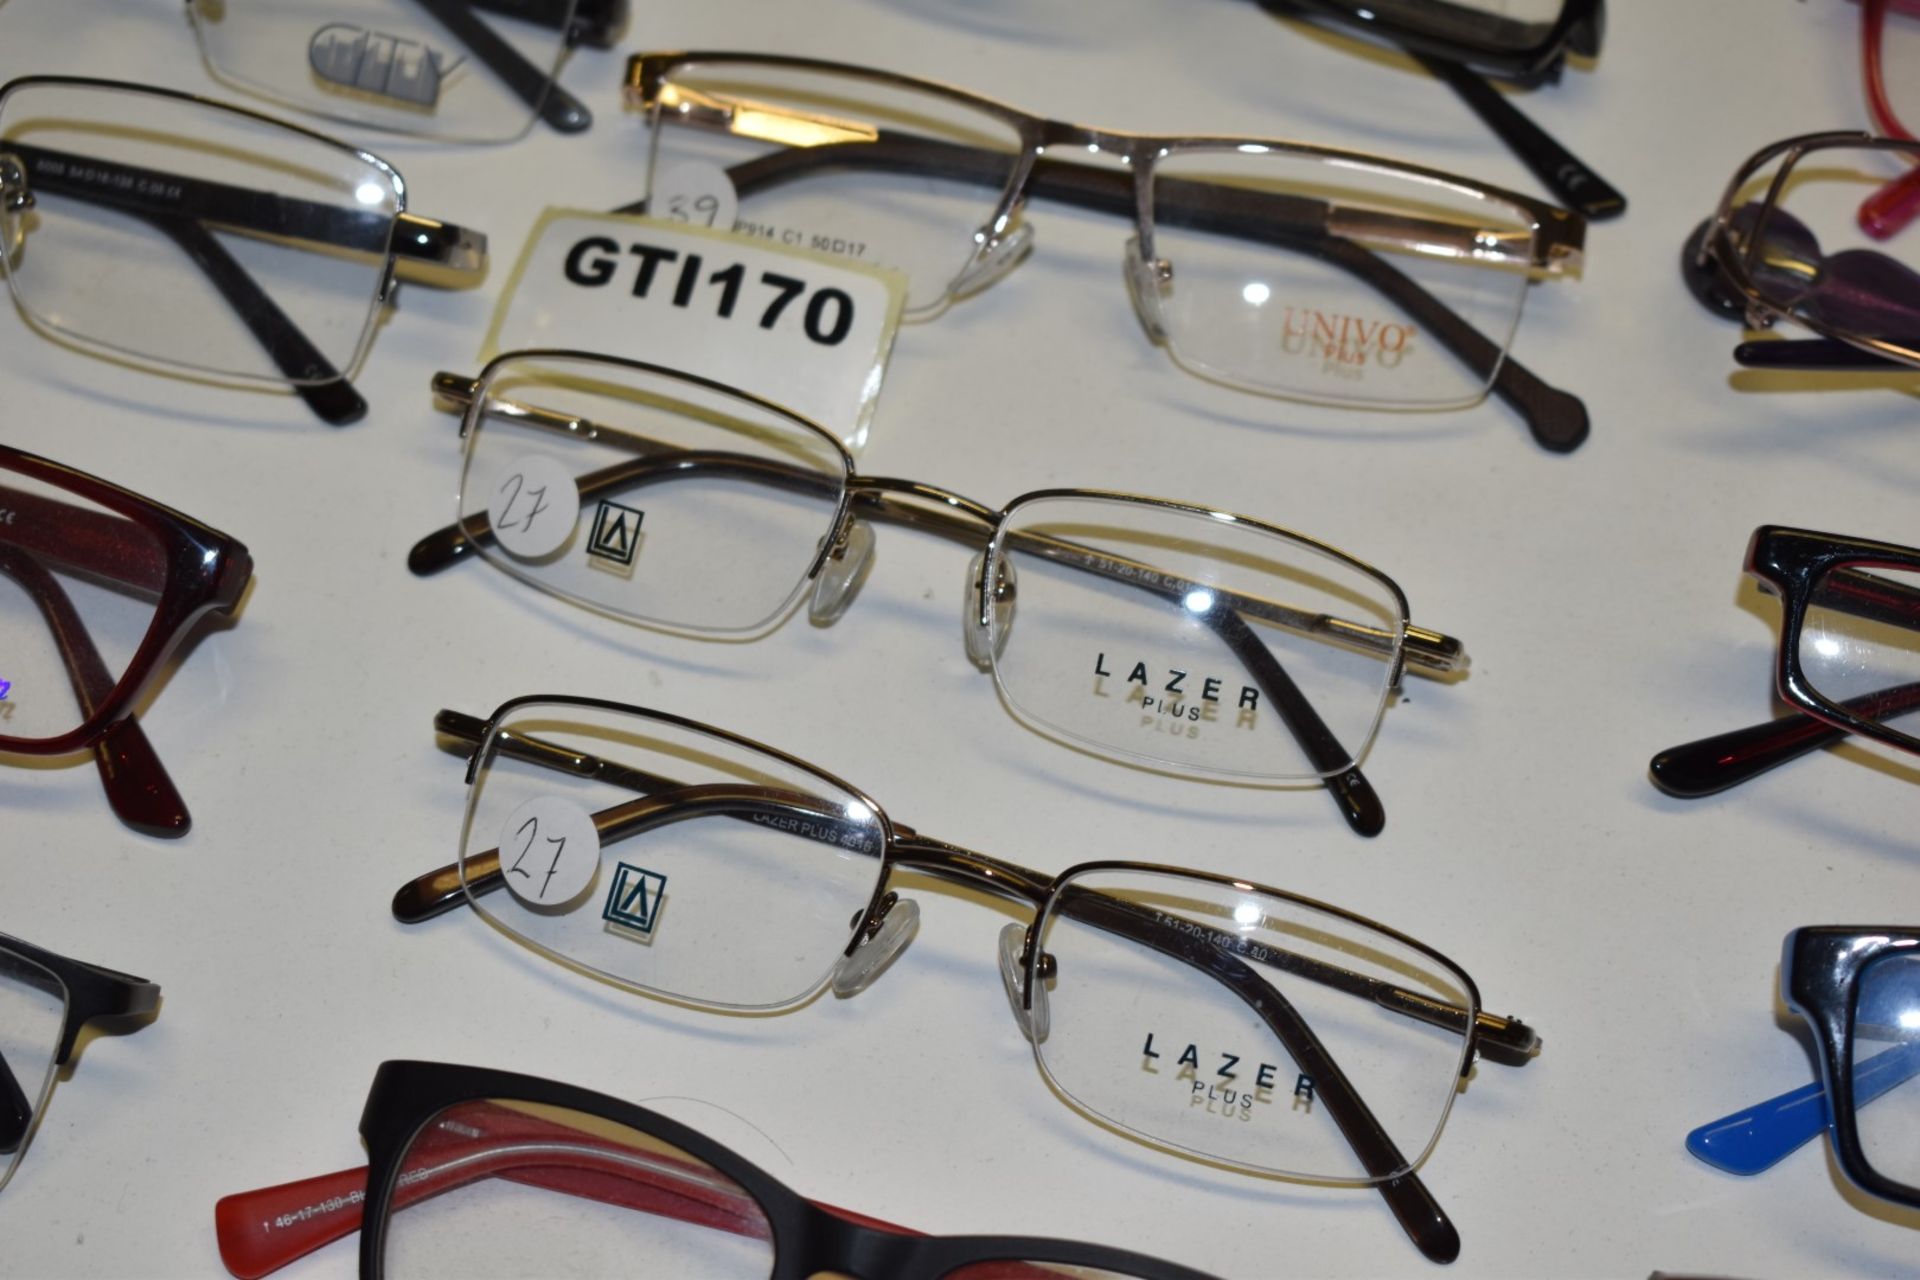 50 x Assorted Pairs of Spectacle Eye Glasses - New and Unused Stock - Various Designs and Brands - Image 13 of 15